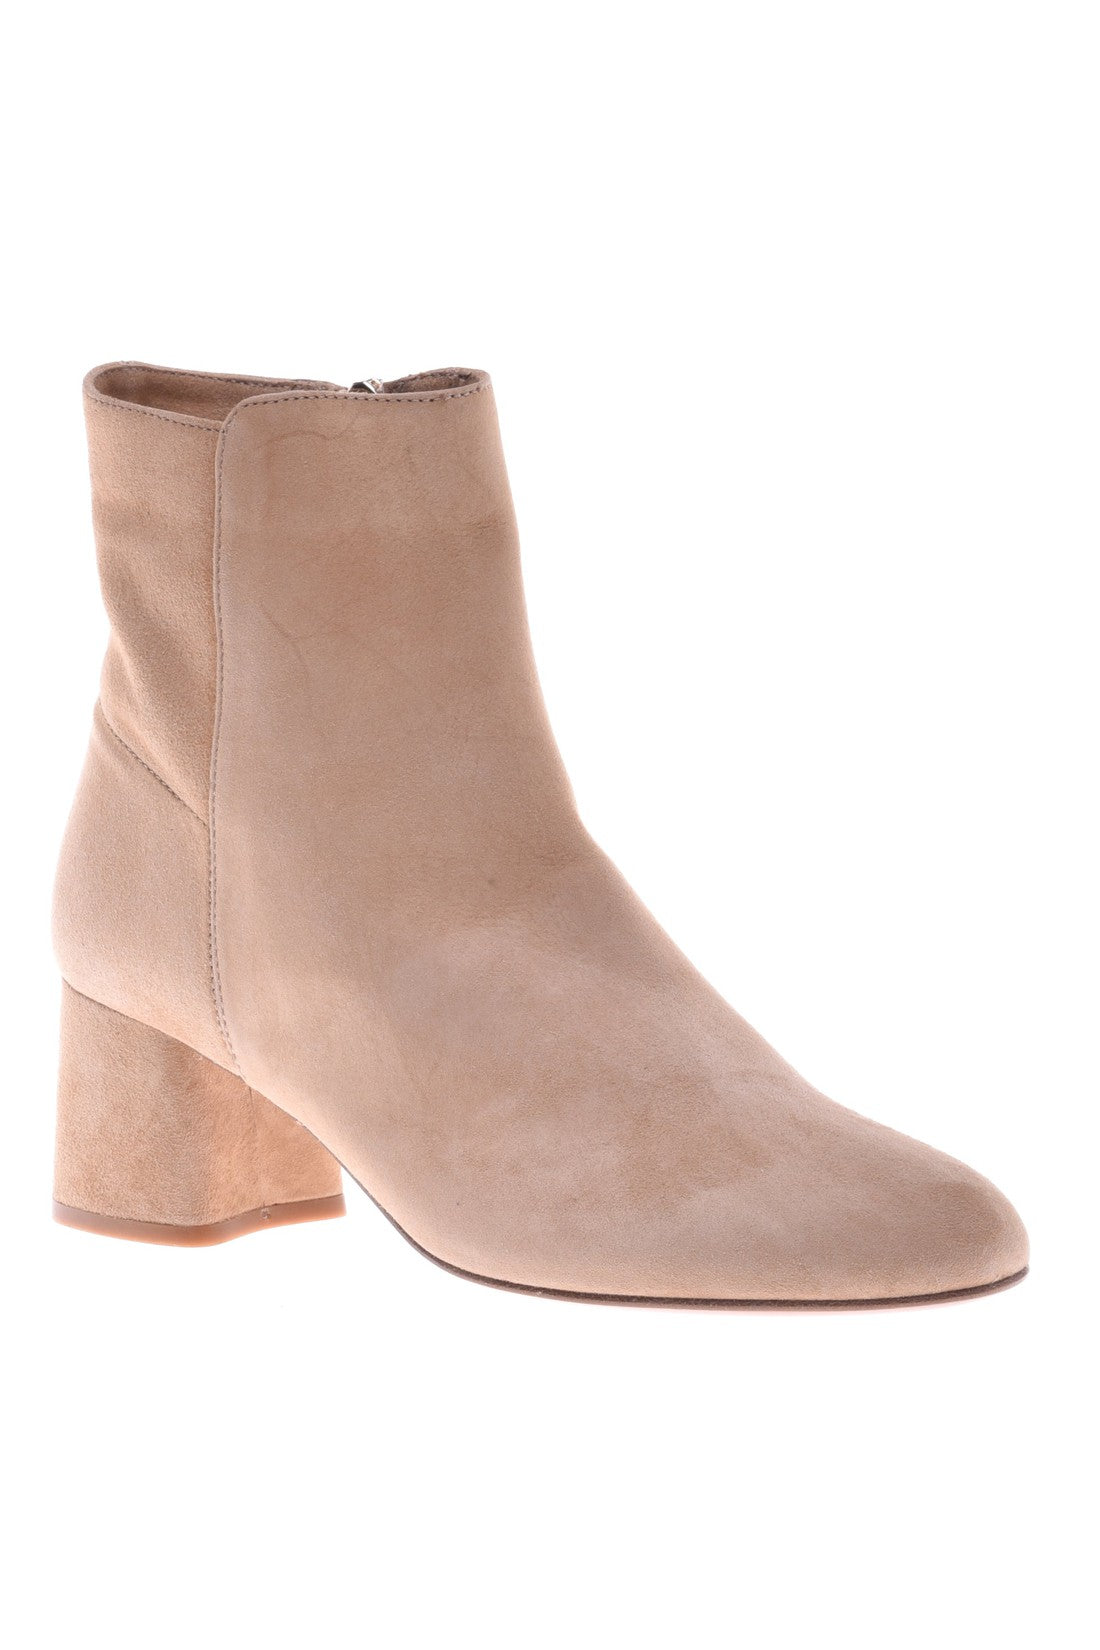 BALDININI-OUTLET-SALE-Ballerina-pump-in-taupe-suede-Stiefel-Stiefeletten-35-ARCHIVE-COLLECTION.jpg